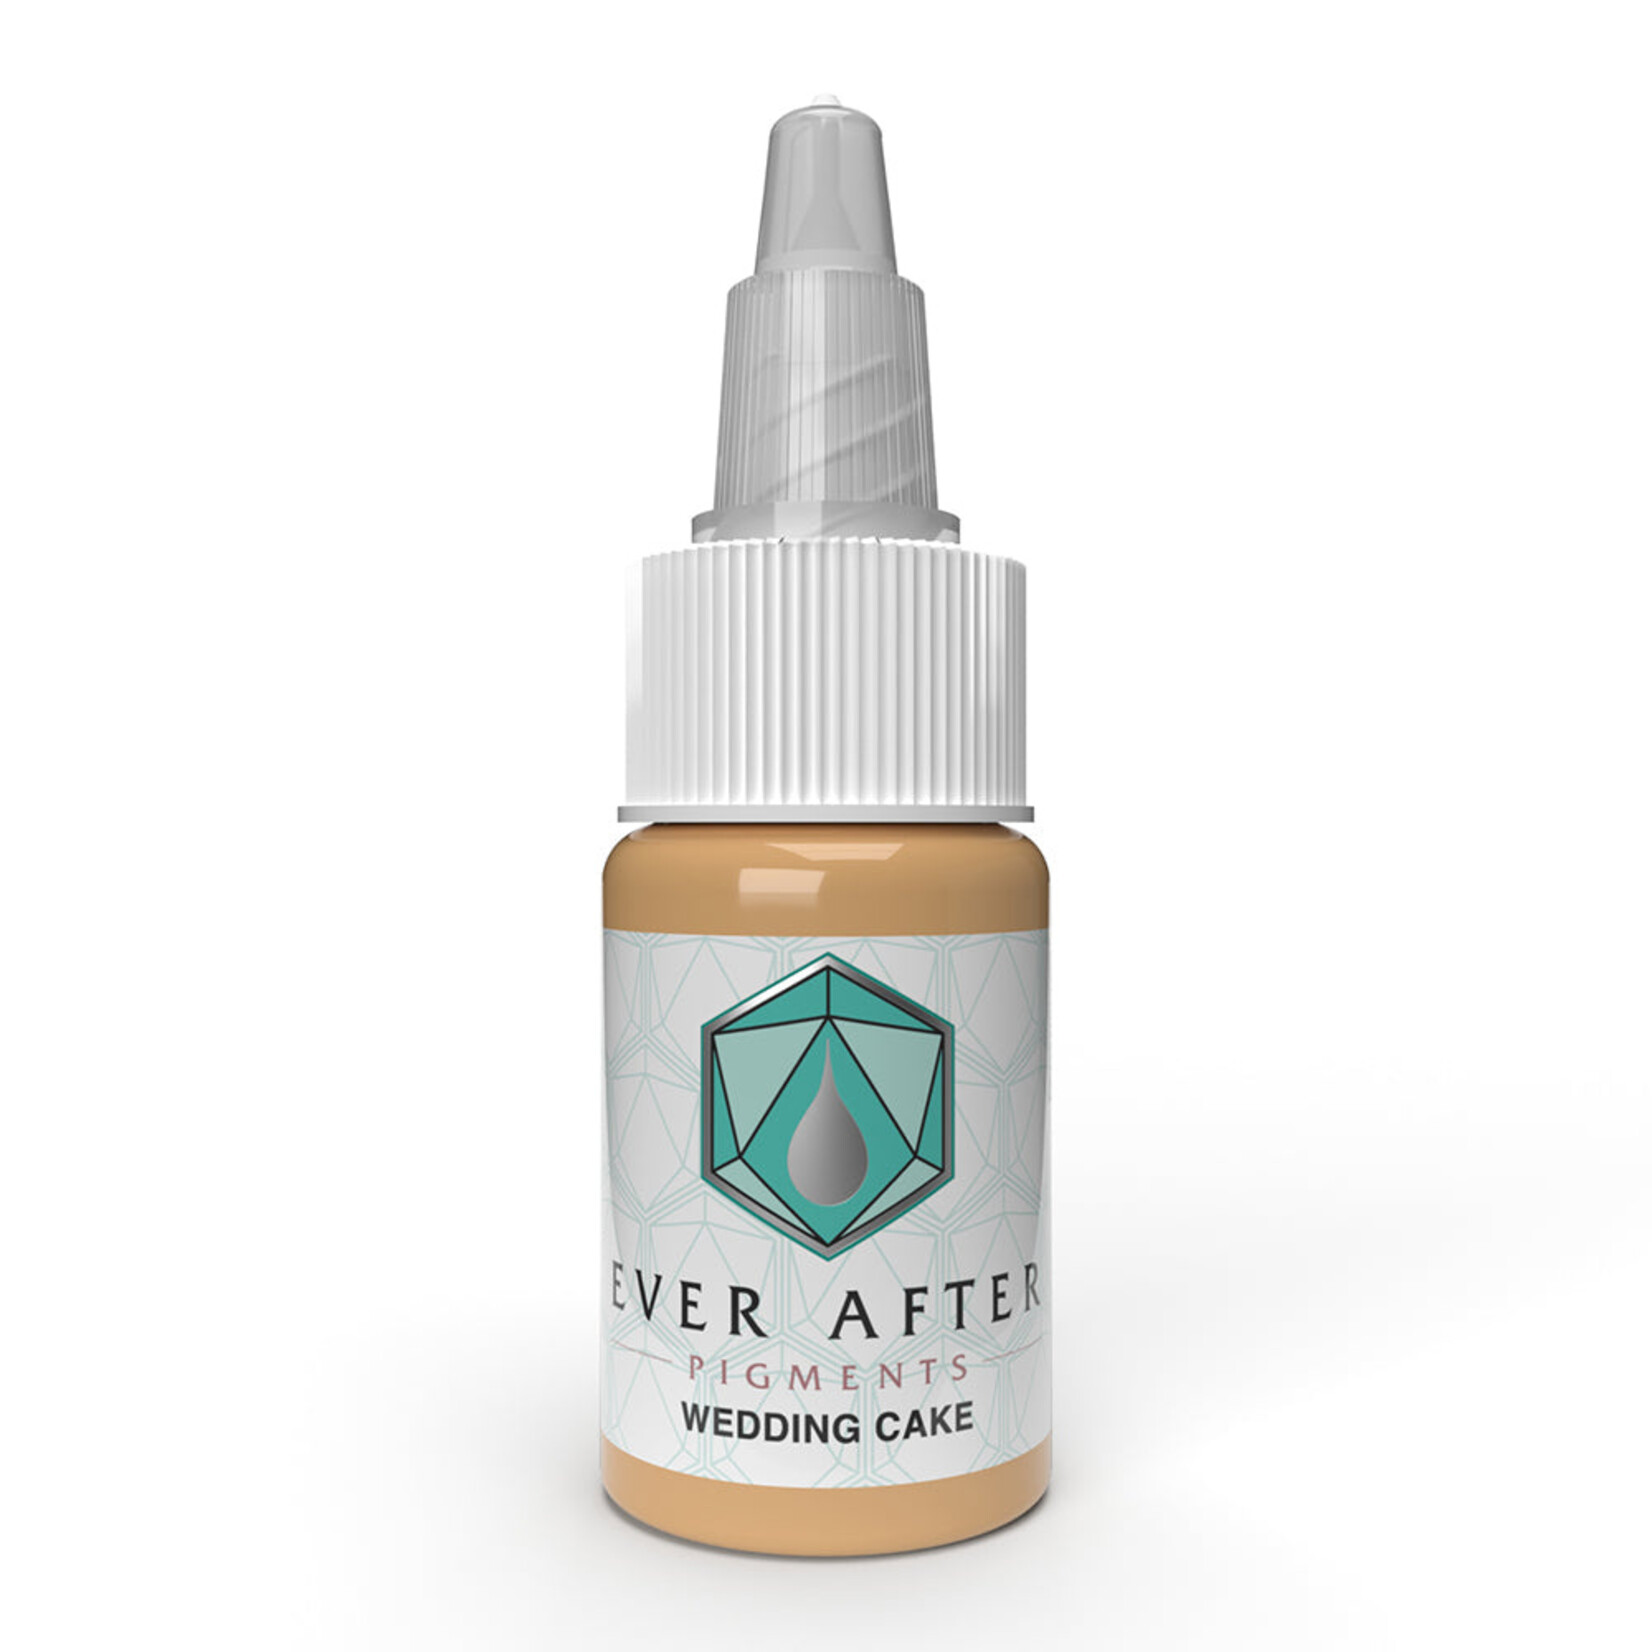 EVER AFTER PIGMENTS - WEDDING CAKE 0.5OZ